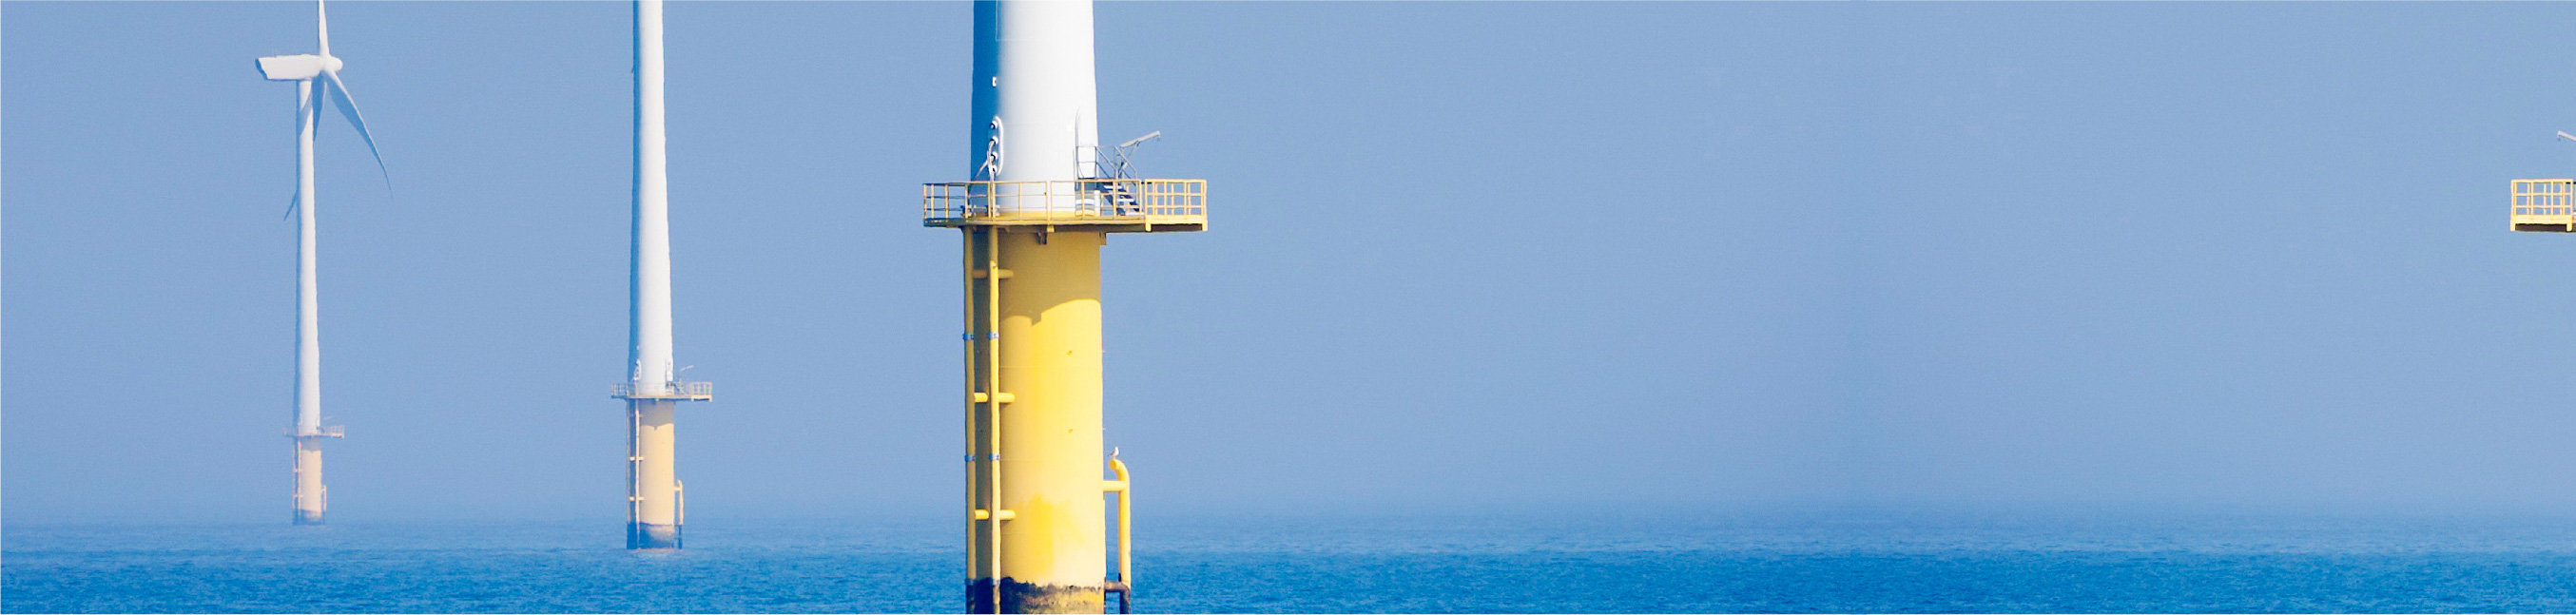 Offshore wind - safety signs